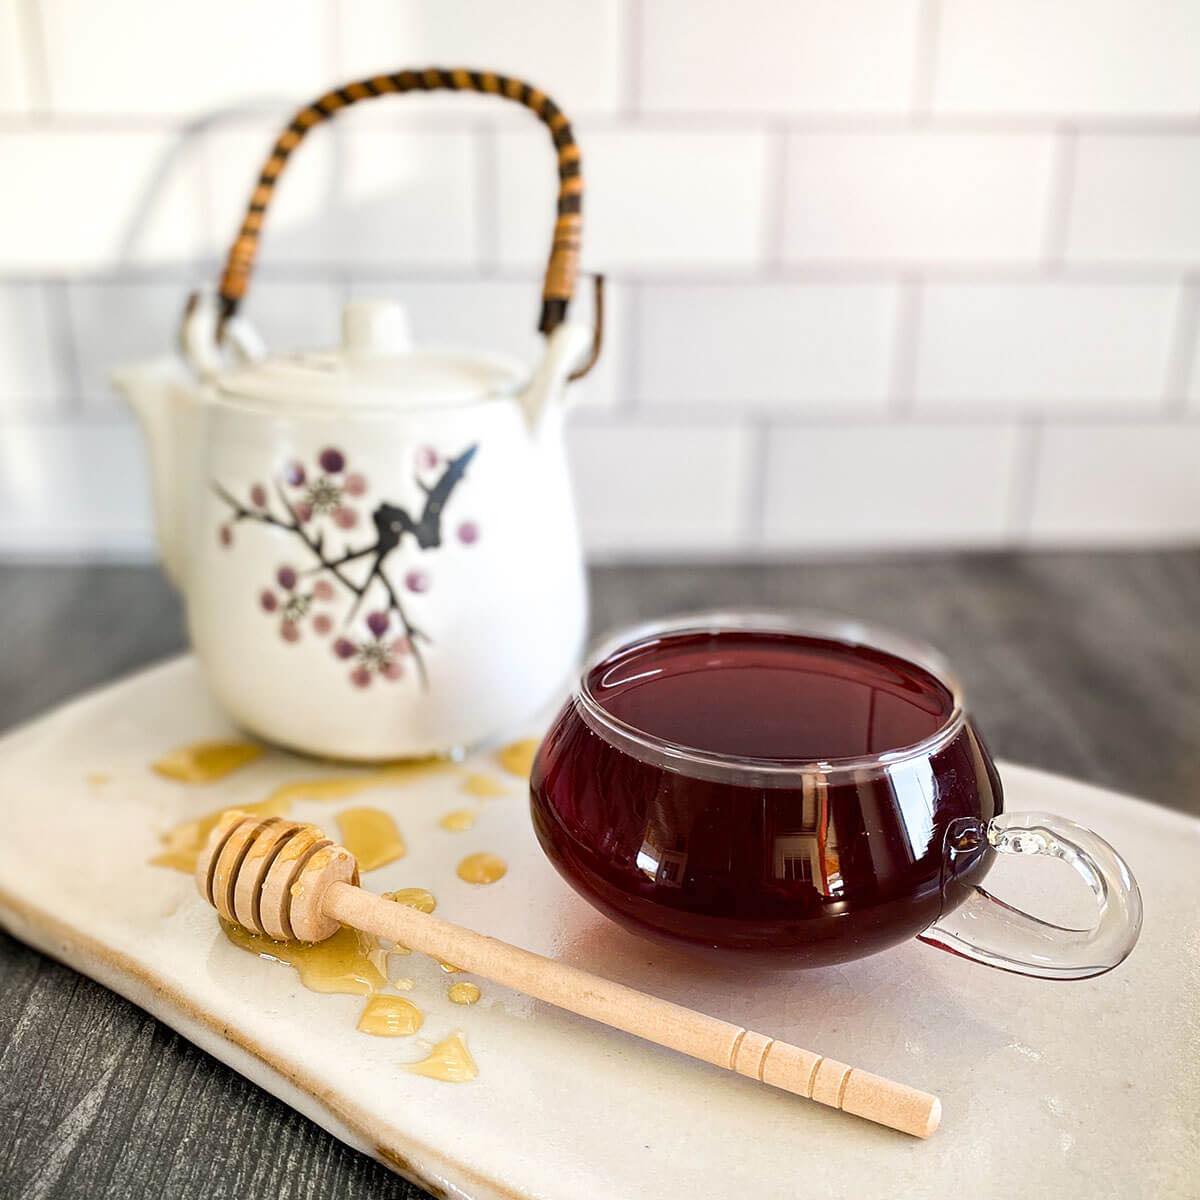 A brewed cup of apple pie tea sits on a counter with a white tea pot and honey wand dripping with honey.